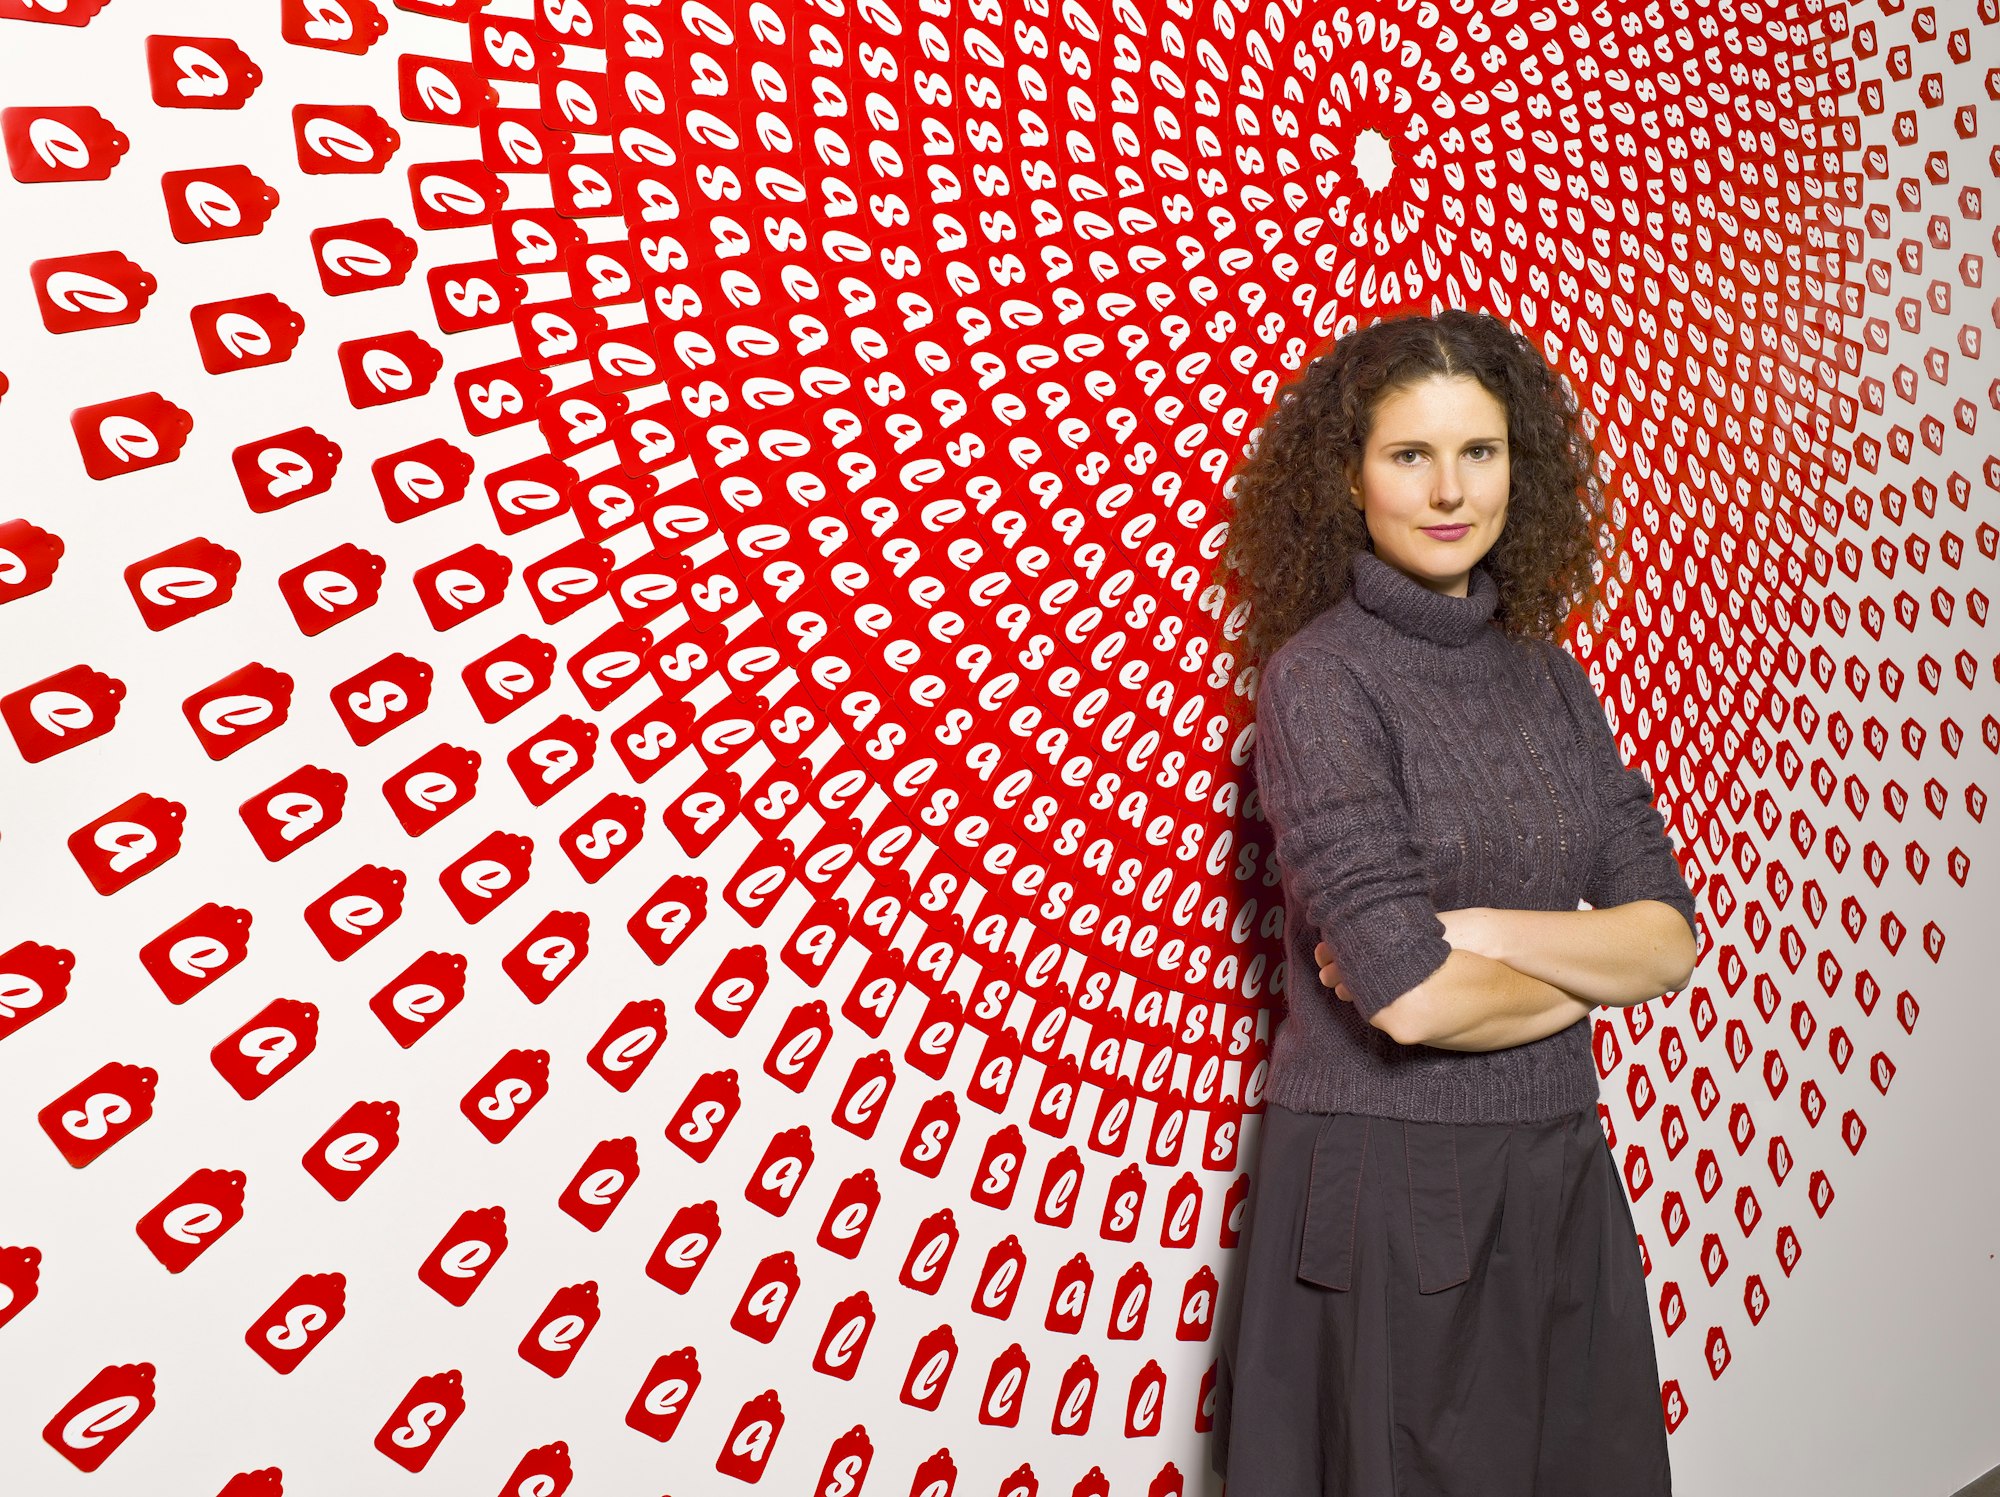 A person with long, centre-parted, curly dark hair, wearing grey polo neck, stands arms crossed against a wall-mounted artwork consisting of many concentric circles of red tags, each with the letter S, A, L or E.